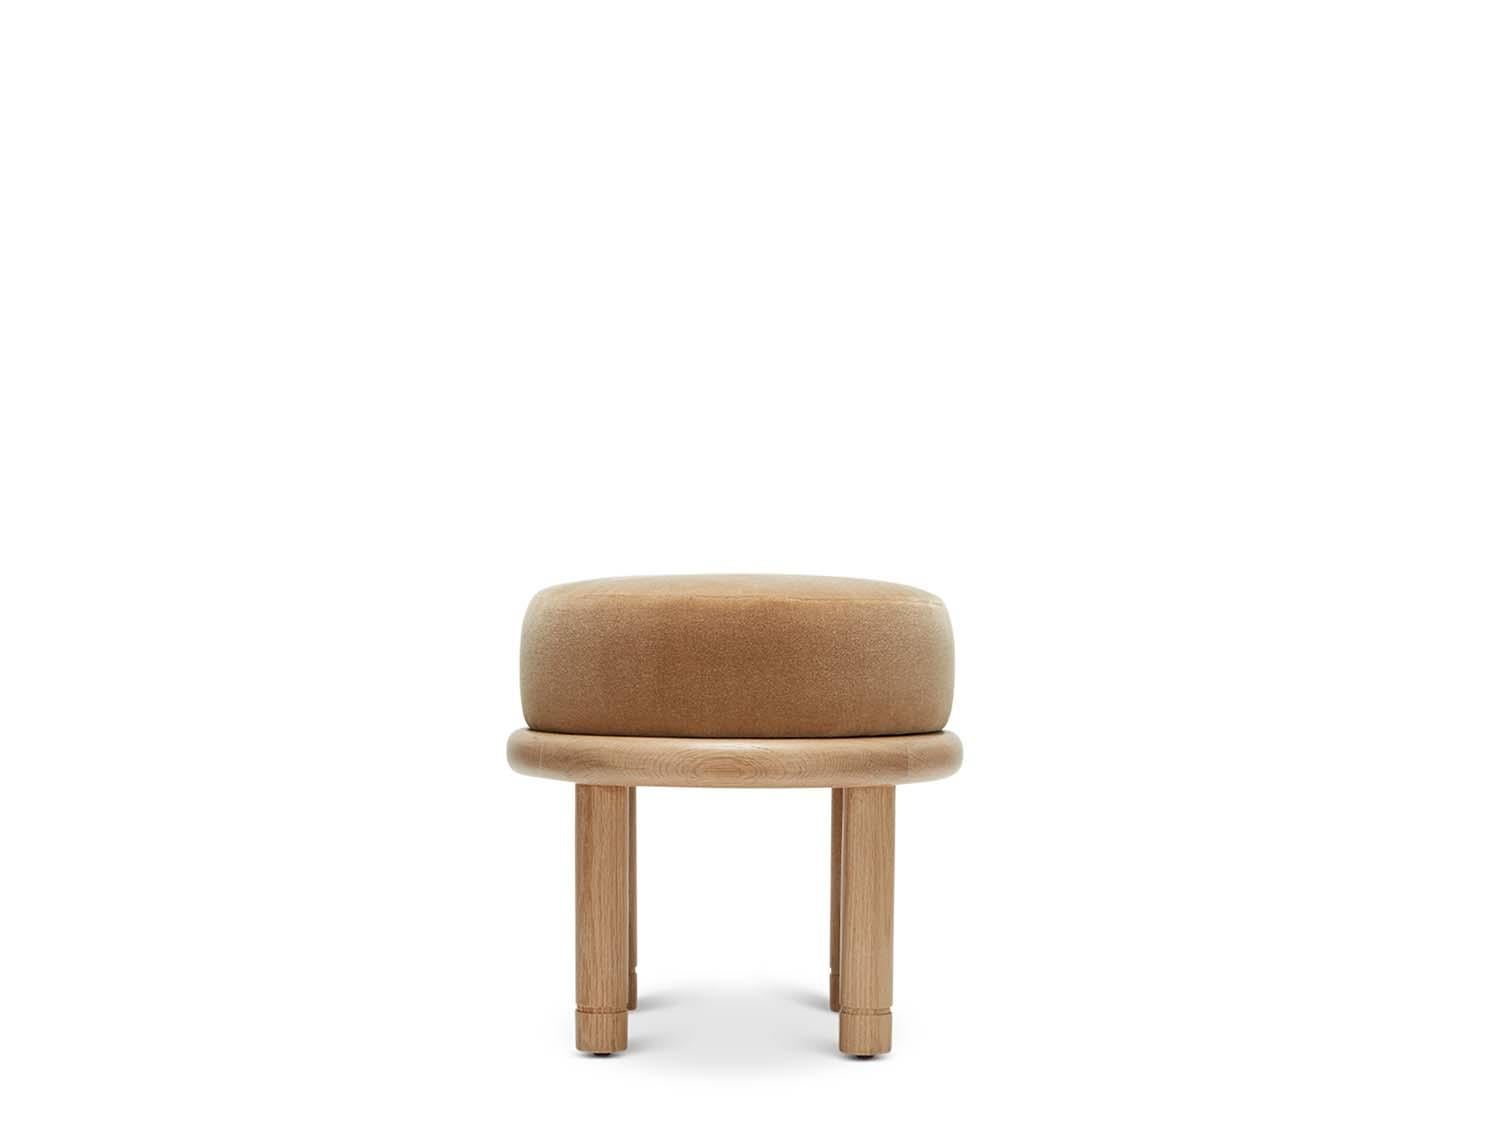 The Petite Moreno ottoman features a round solid wood base with four cylindrical legs and an upholstered top. Available in American walnut or white oak. 

 The Lawson-Fenning Collection is designed and handmade in Los Angeles, California. Reach